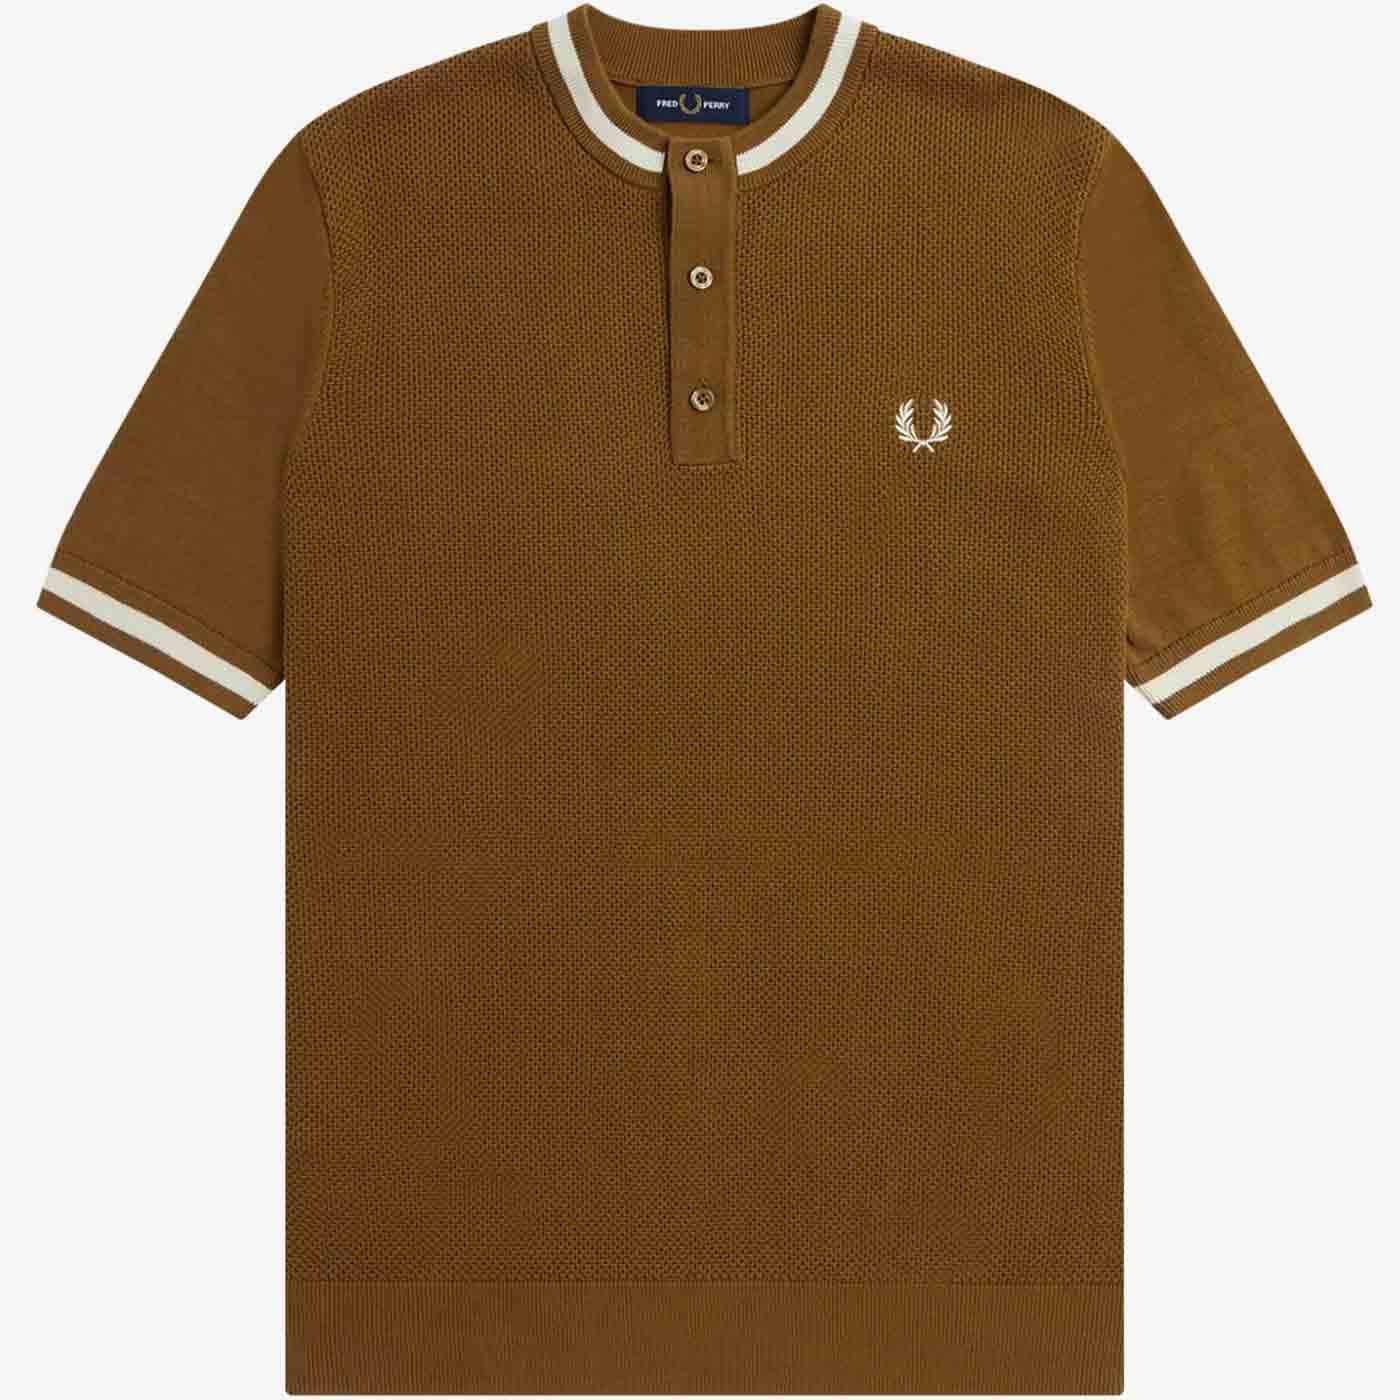 Fred Perry Retro 60s Knitted Henley T-shirt Stone